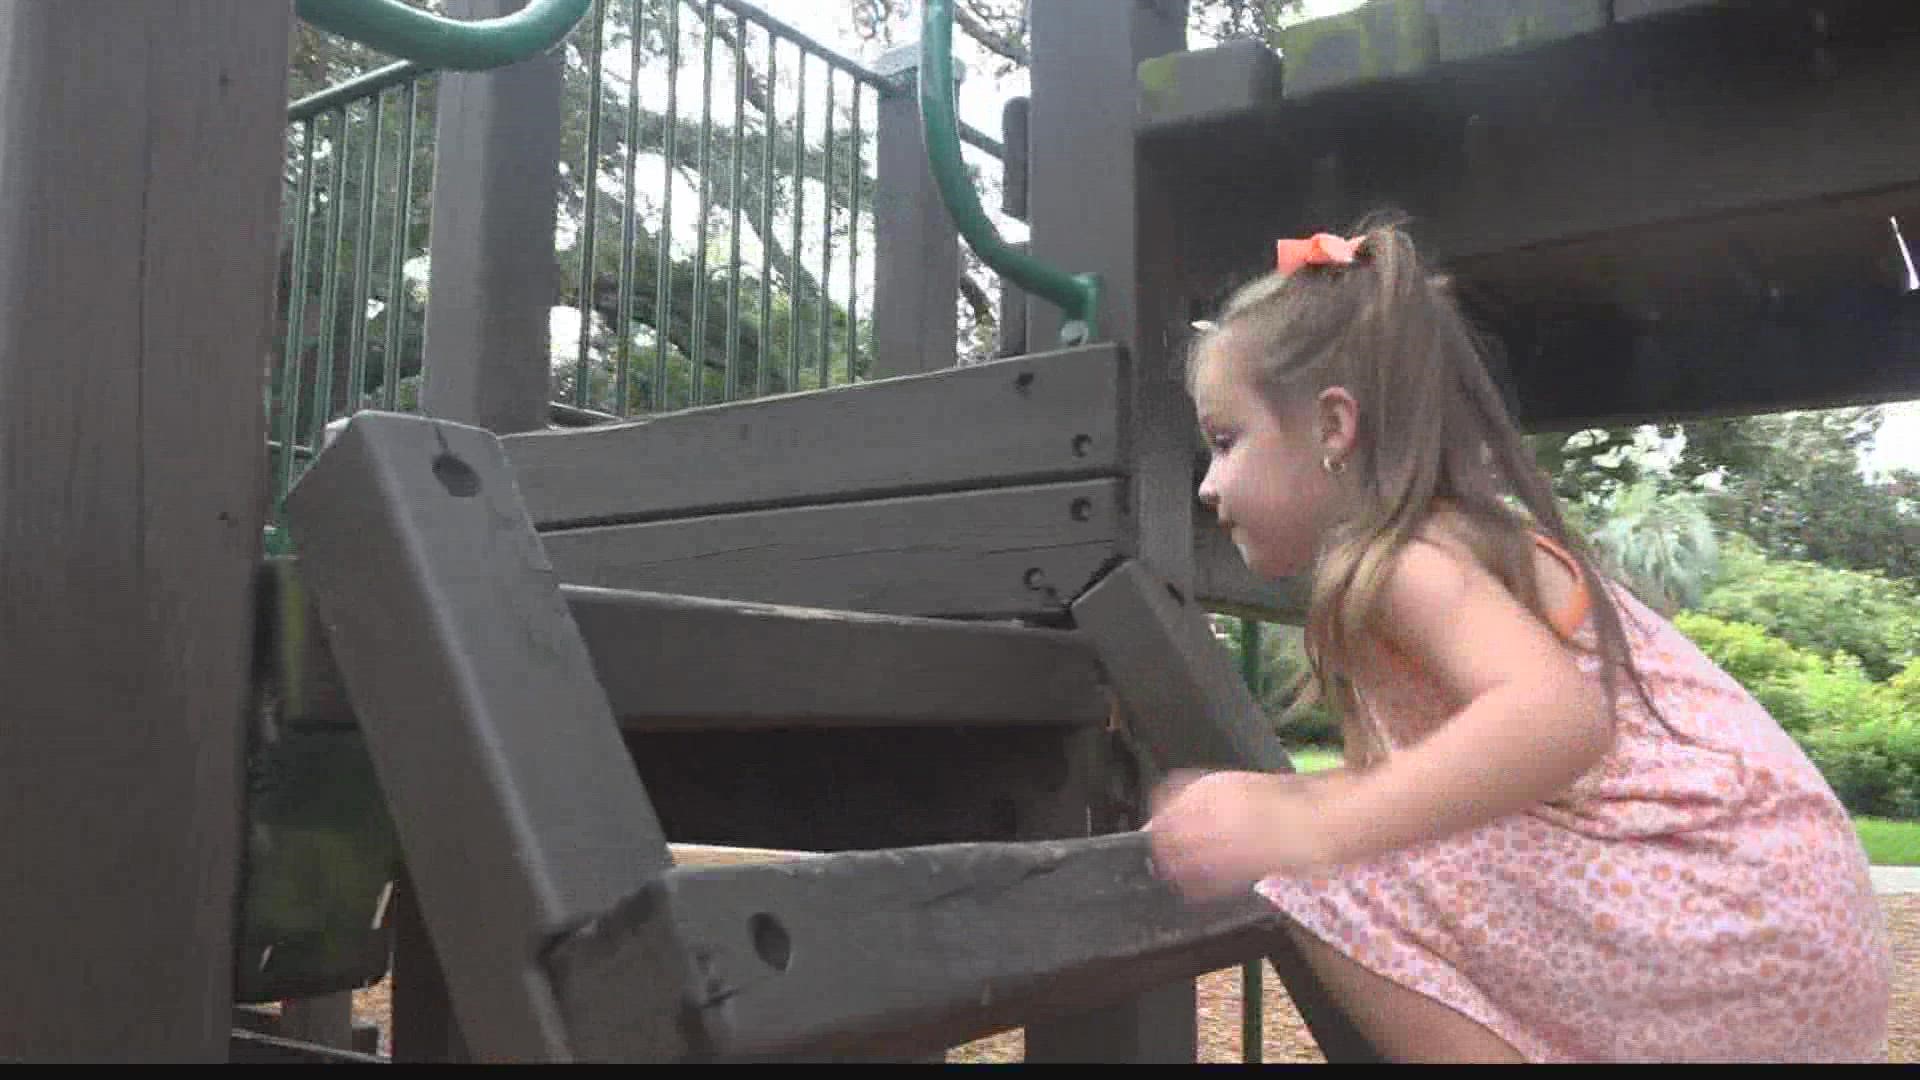 Mason was diagnosed with spina bifida while in her mother's womb. She's beating the odds.